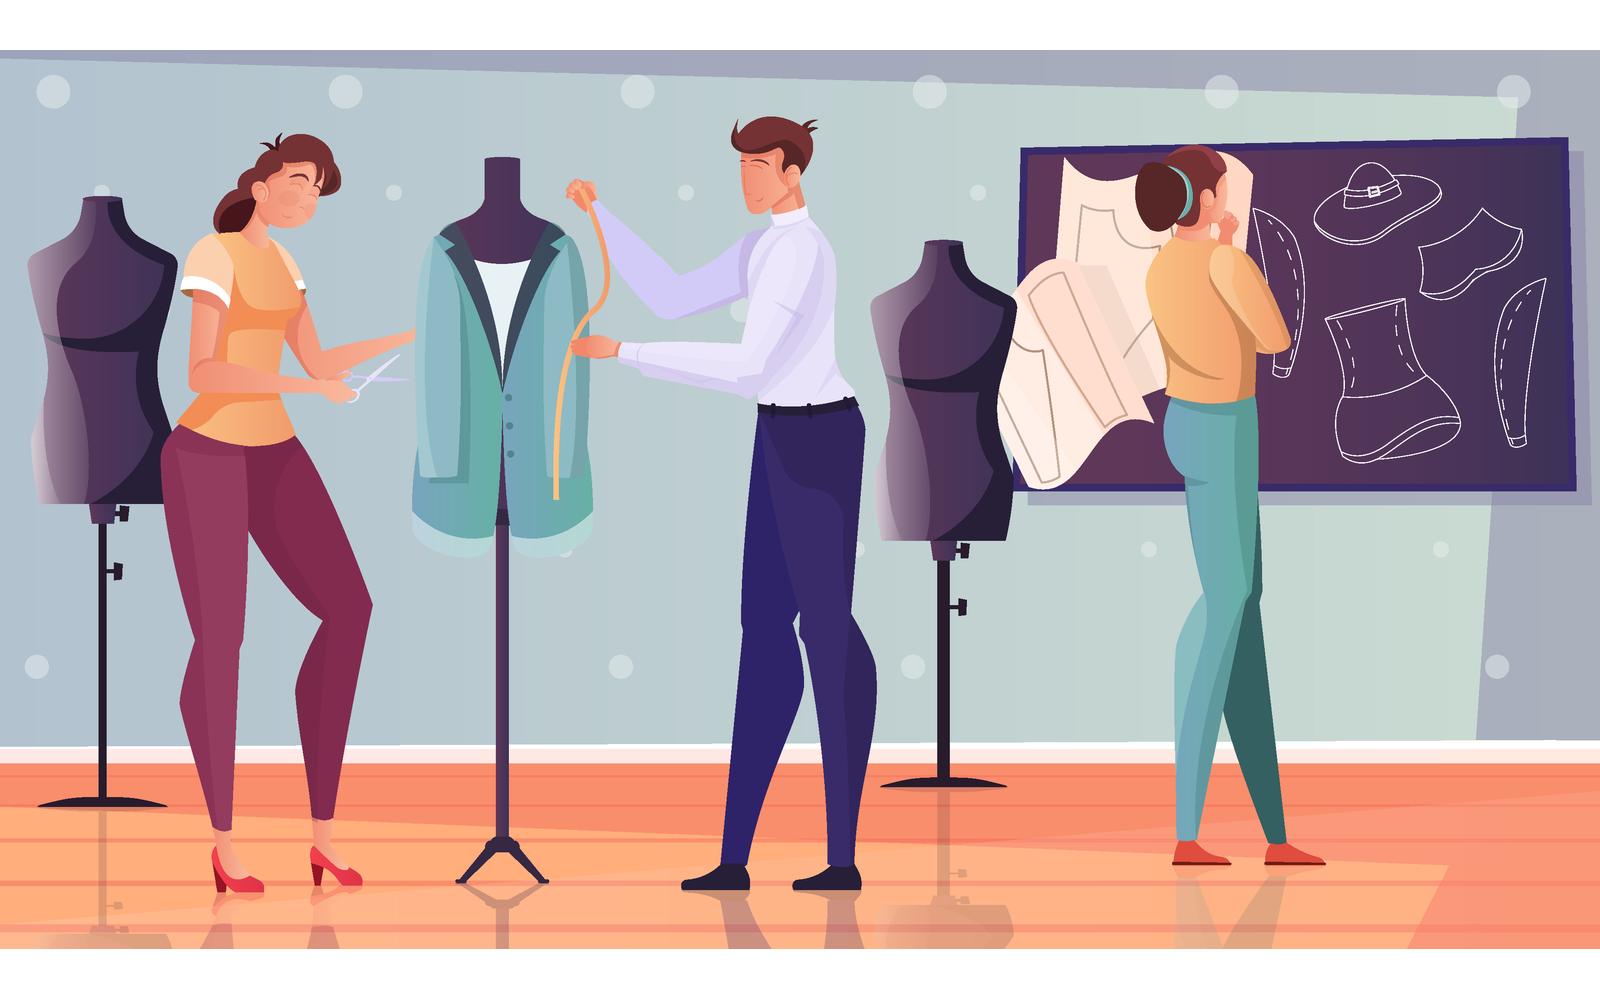 Tailoring Modeling Flat 201151125 Vector Illustration Concept